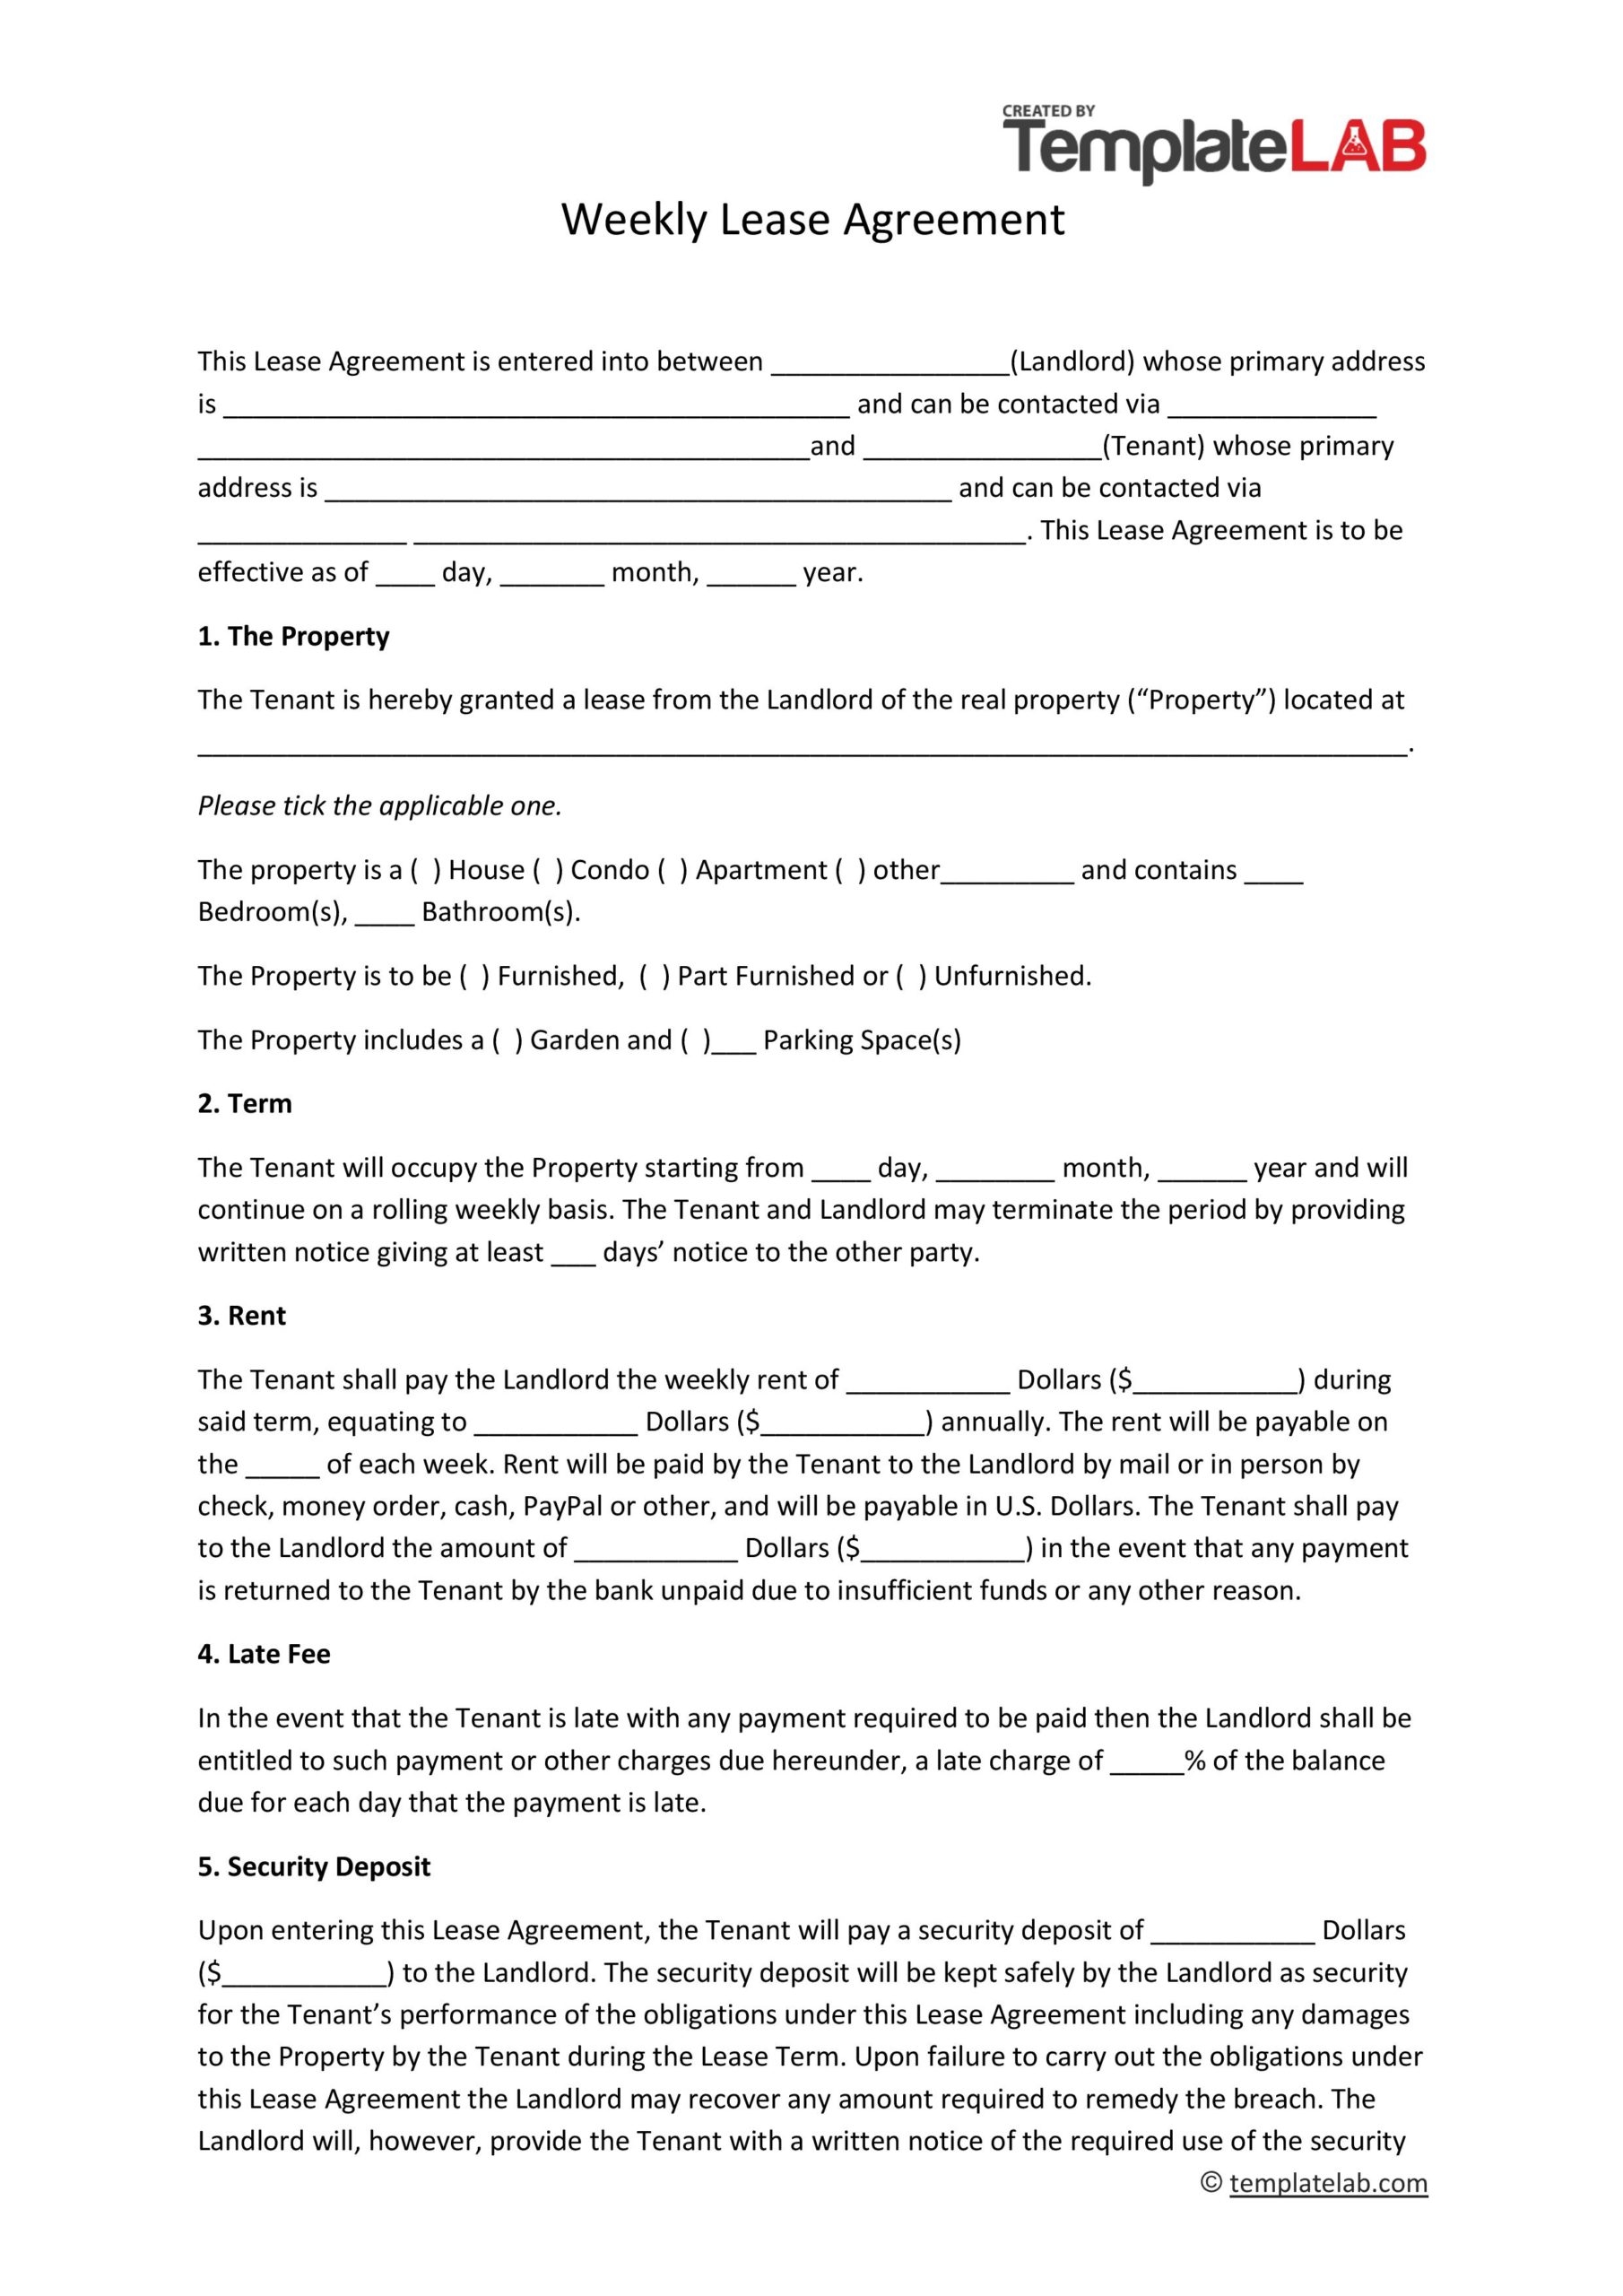 44 Free Residential Lease Agreement Templates Word PDF - Apartment Lease Agreement Free Printable